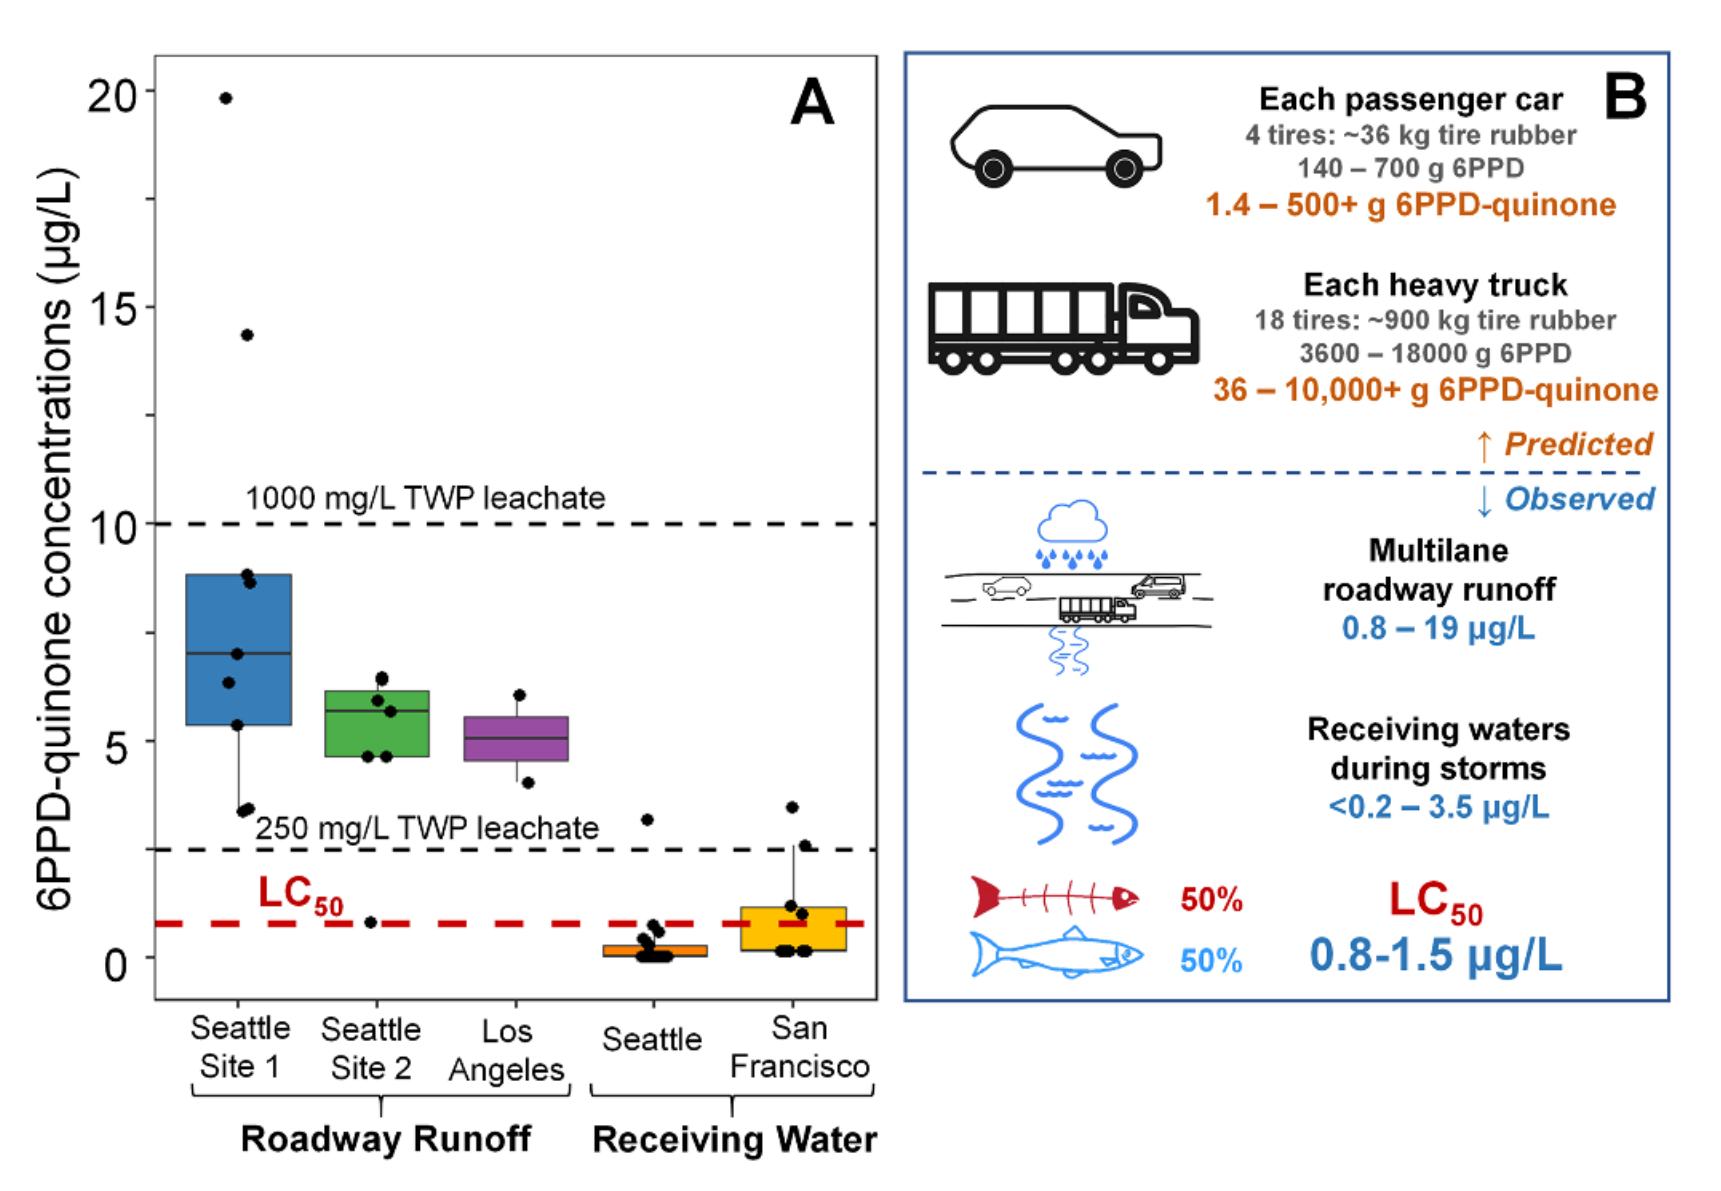 Environmental relevance of 6PPD-quinone. (A) Using retrospective UPLC-HRMS analysis of archived sample extracts, 6PPD-quinone was quantified in roadway runoff and runoff-impacted receiving waters. Each symbol corresponds to duplicate or triplicate samples, boxes represent first and third quartiles. For comparison, the 0.8 pg/L LC50 value for juvenile coho salmon and detected 6PPD-quinone levels in 250 and 1000 mg/L TWP leachate are included. (B) Predicted ranges of potential 6PPD-quinone mass formation in passenger cars (e.g., 4 tires, -36 kg tire rubber mass) and heavy trucks, (e.g., 18 tires, -900 kg of tire rubber) (represented in orange) and measured 6PPD-quinone concentrations in affected environmental compartments (represented in blue, with experimental data italicized). Predicted ranges reflect calculations applying 0.4-2% 6PPD per total vehicle tire rubber mass followed by various yield scenarios (1-75% ultimate yields) for 6PPD reaction with ground-level ozone to form 6PPD-quinone. Graphic: Tian, et al. / Science